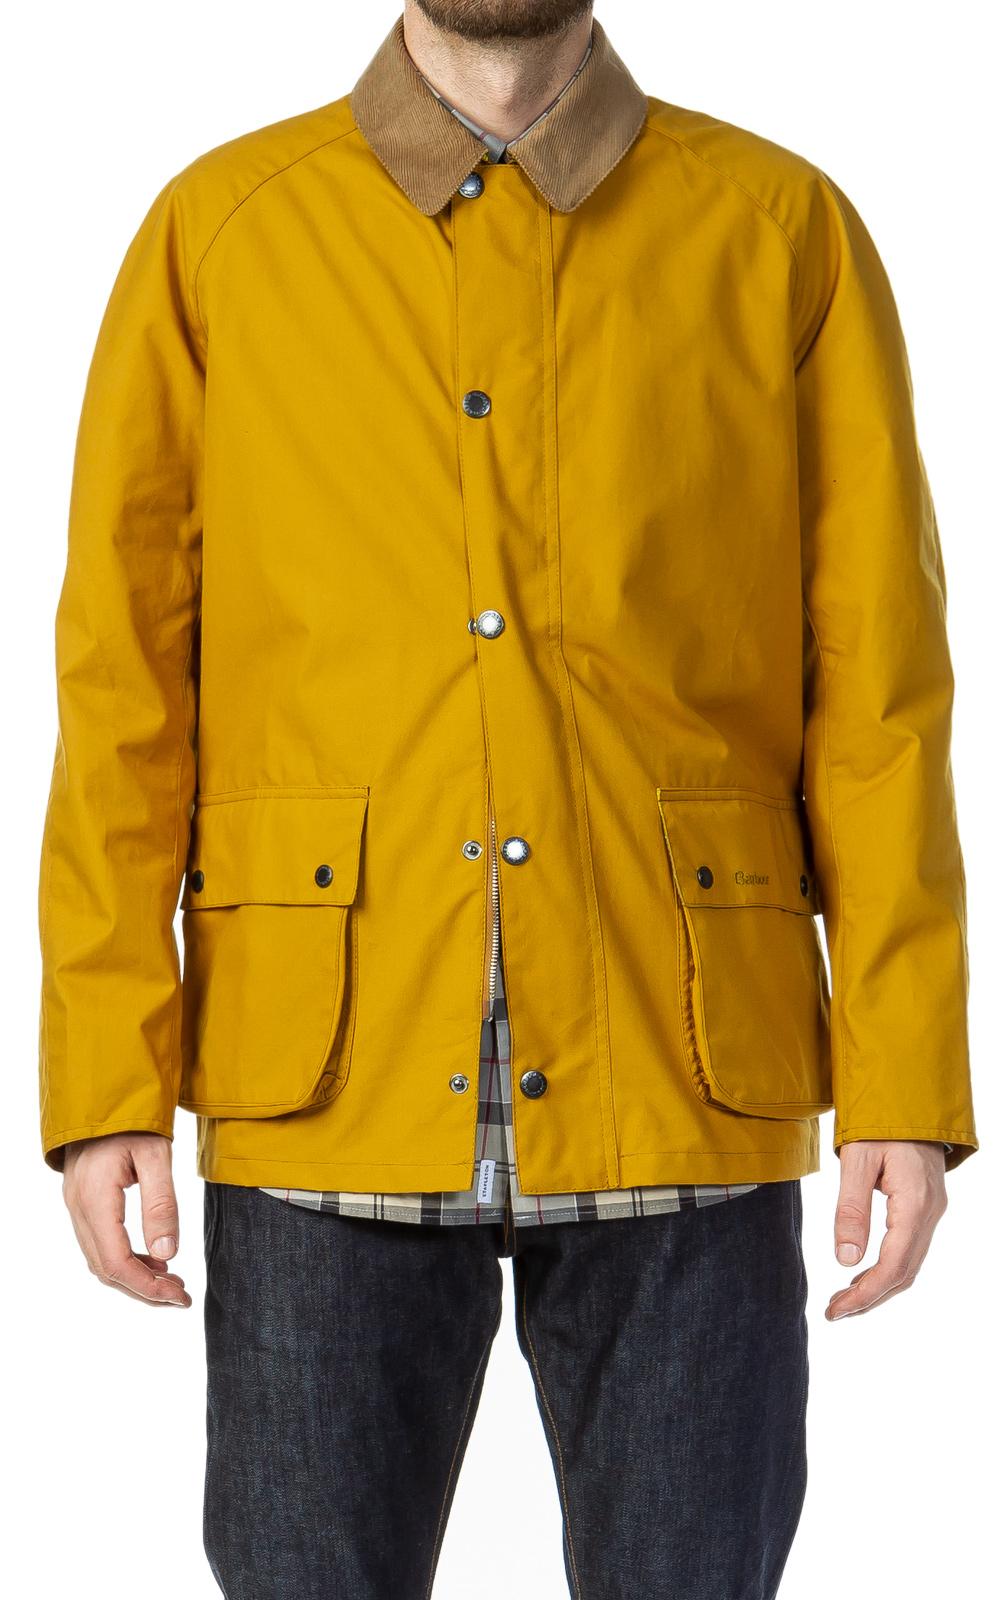 Barbour Corduroy Awe Casual Jacket Cumin in Yellow for Men - Lyst